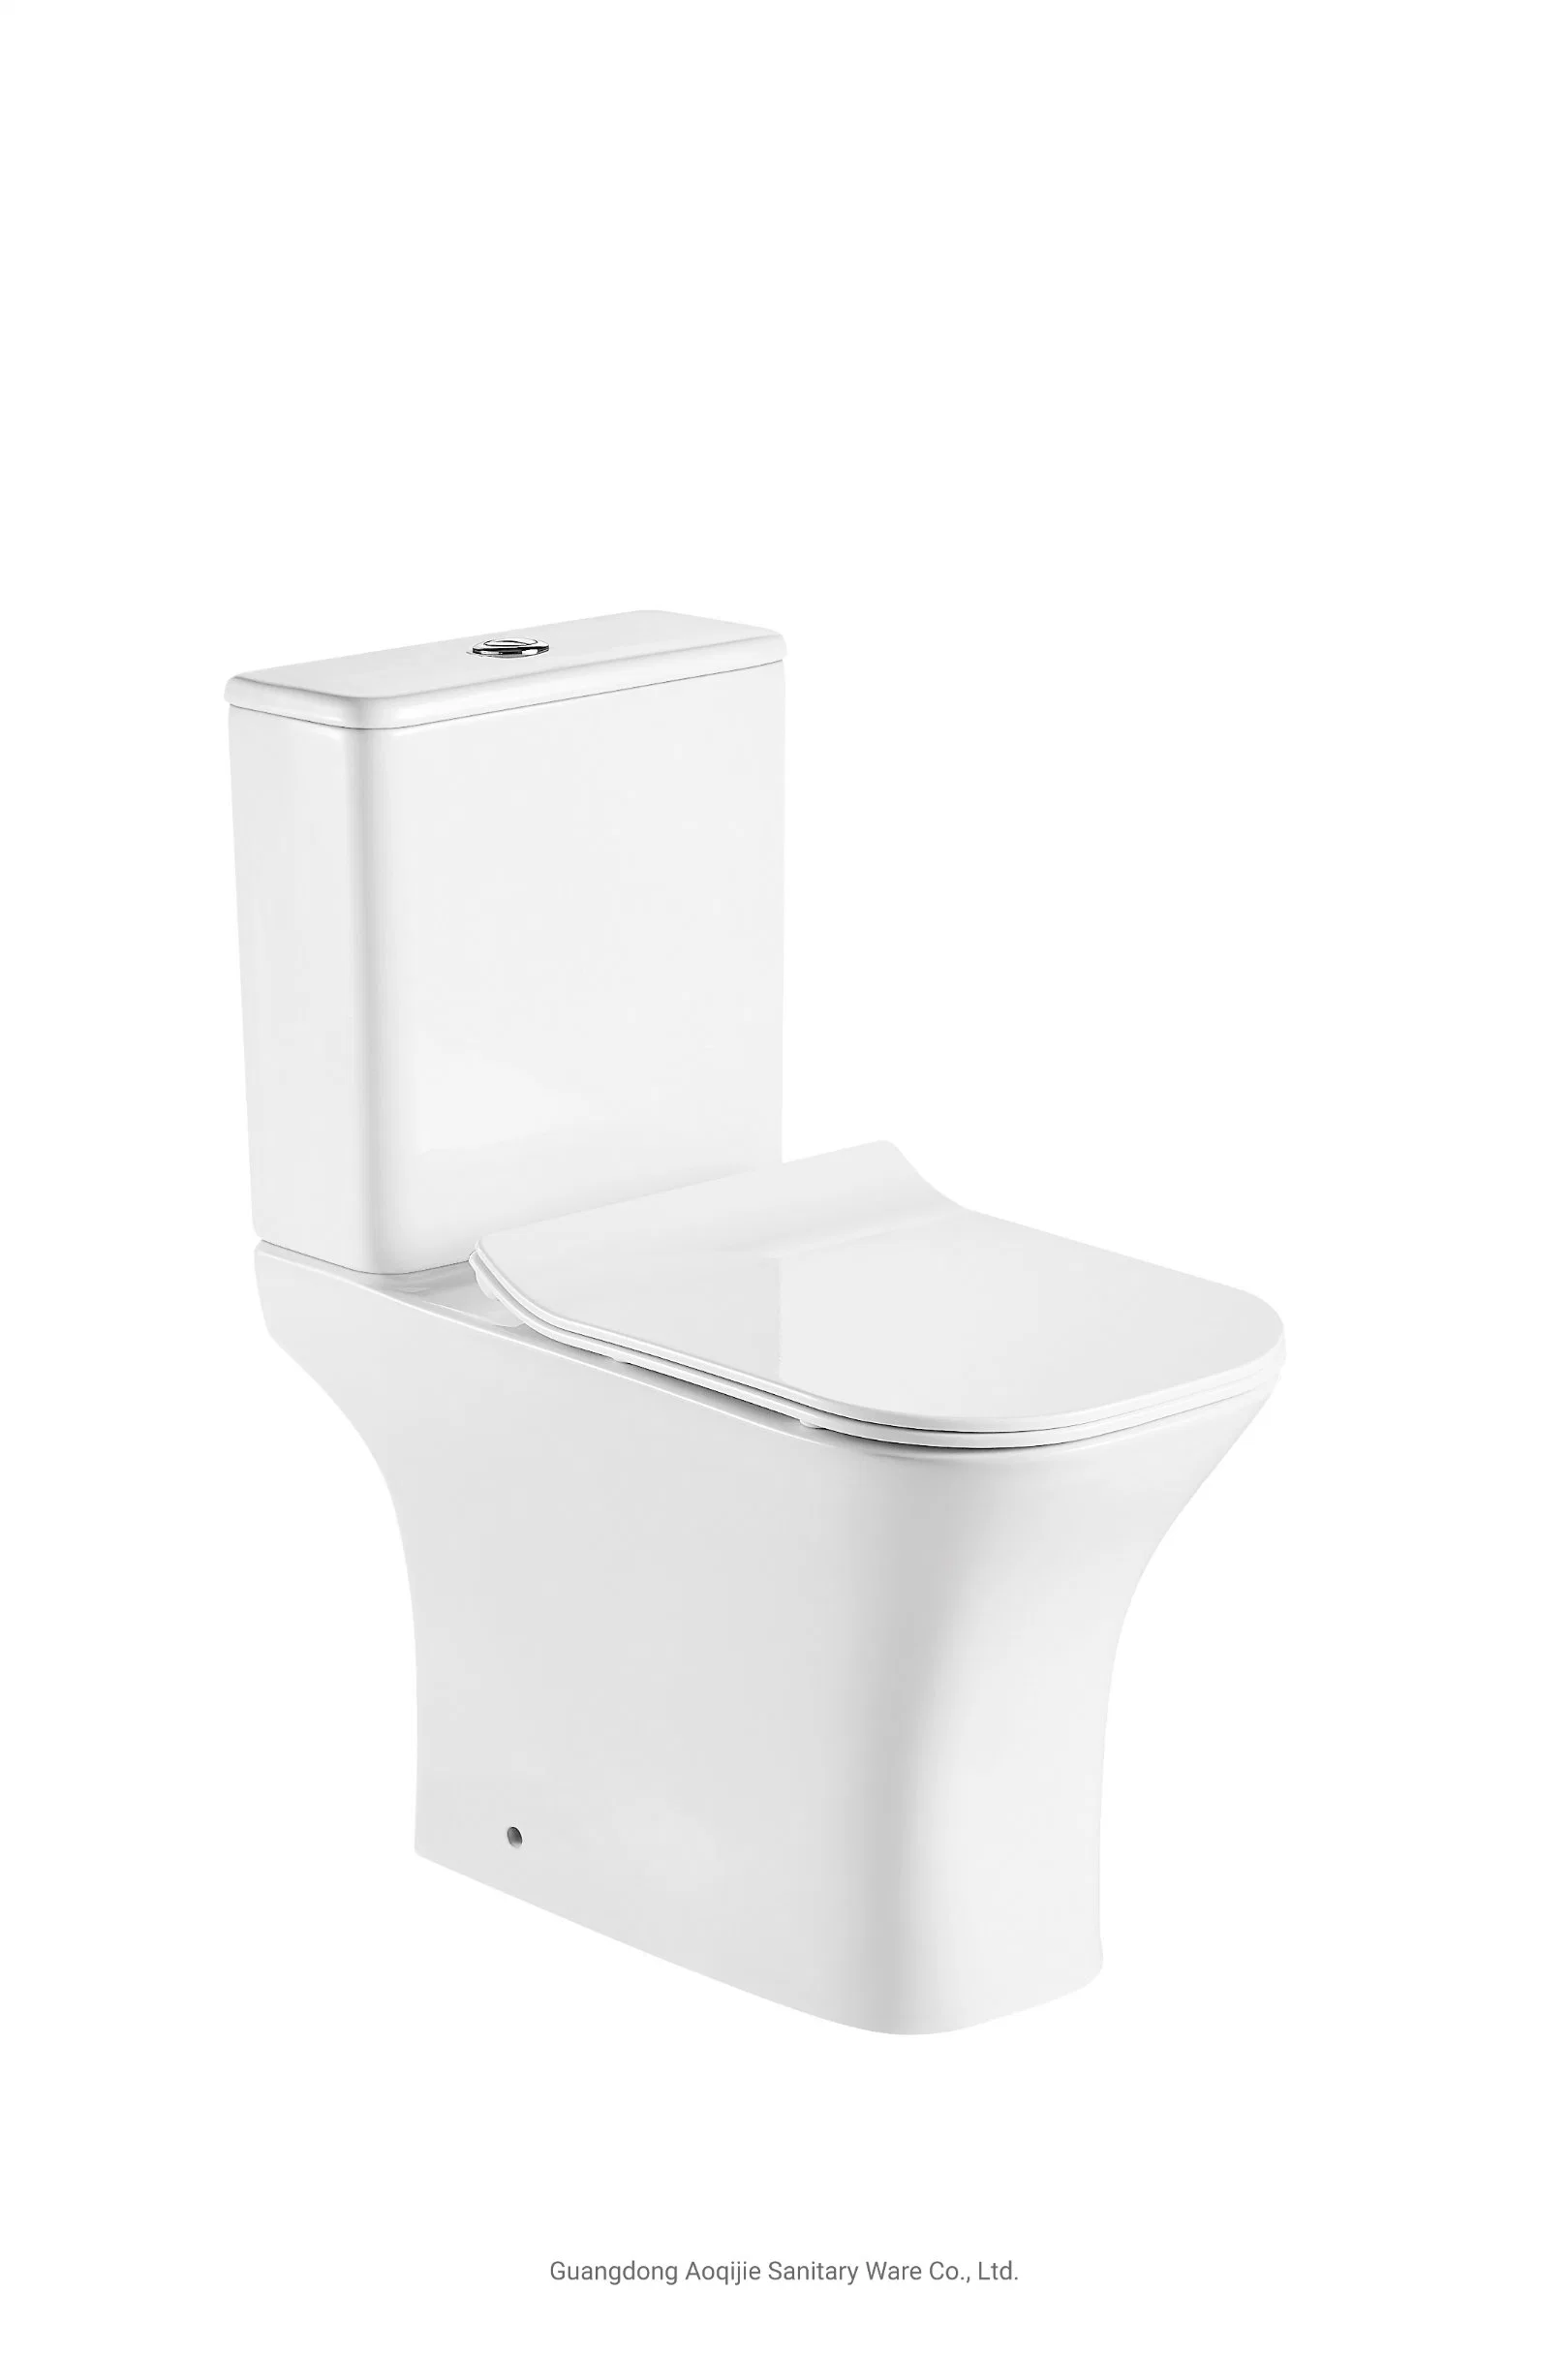 Floor Standing Wc Two Piece Toilet Couple Closet Toilet Sanitary Ware Rimless Round Small Size Wall Mounted Wc Toilet Set Bathroom Accessories